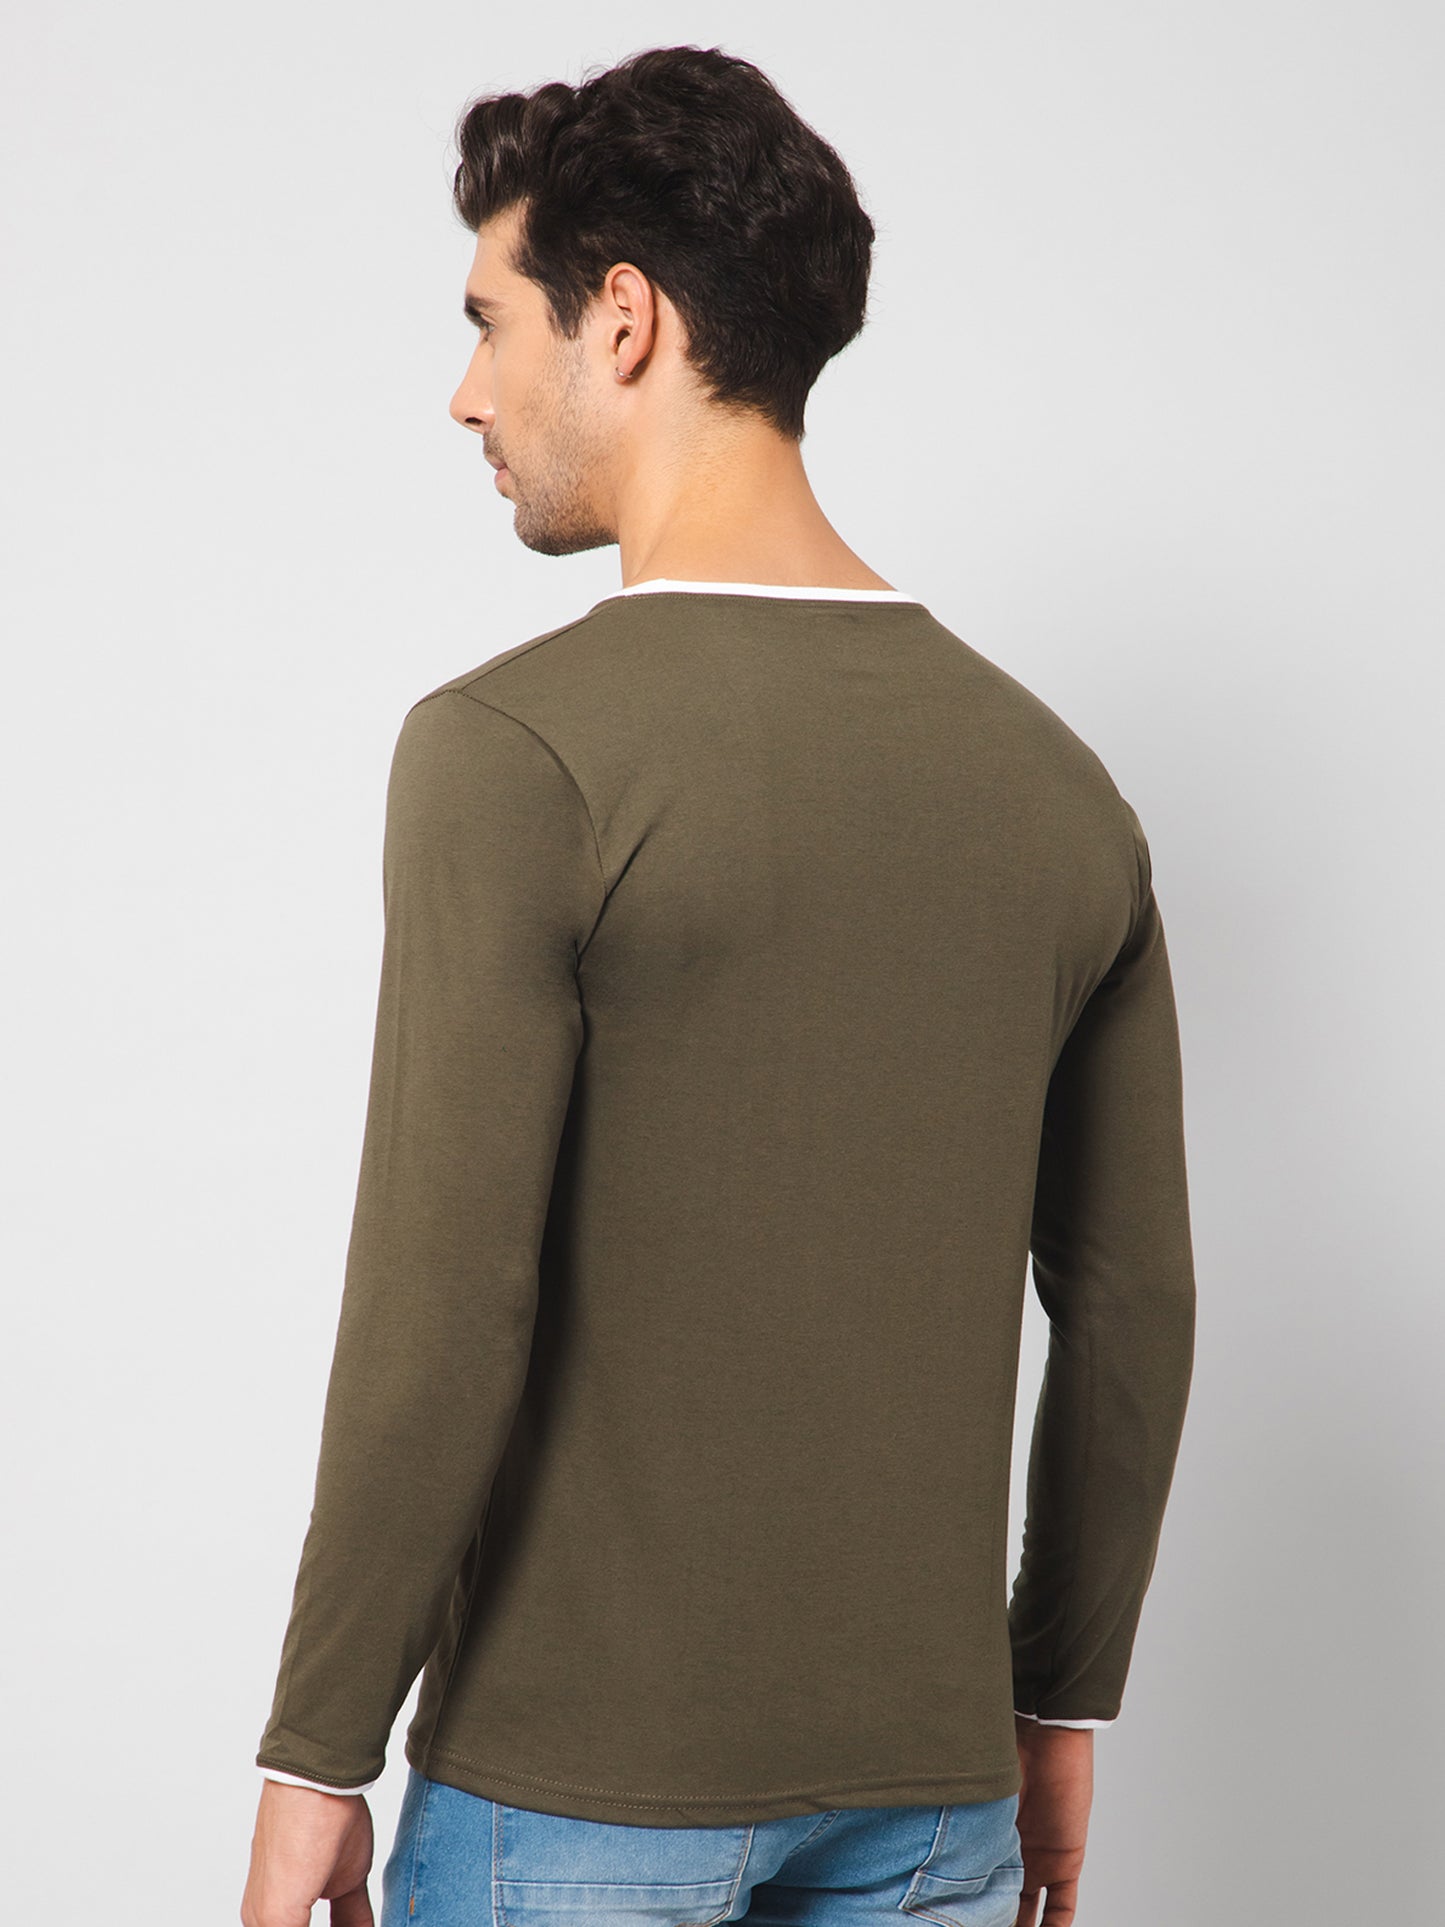 Cotton Olive Green Full Sleeves T-shirt